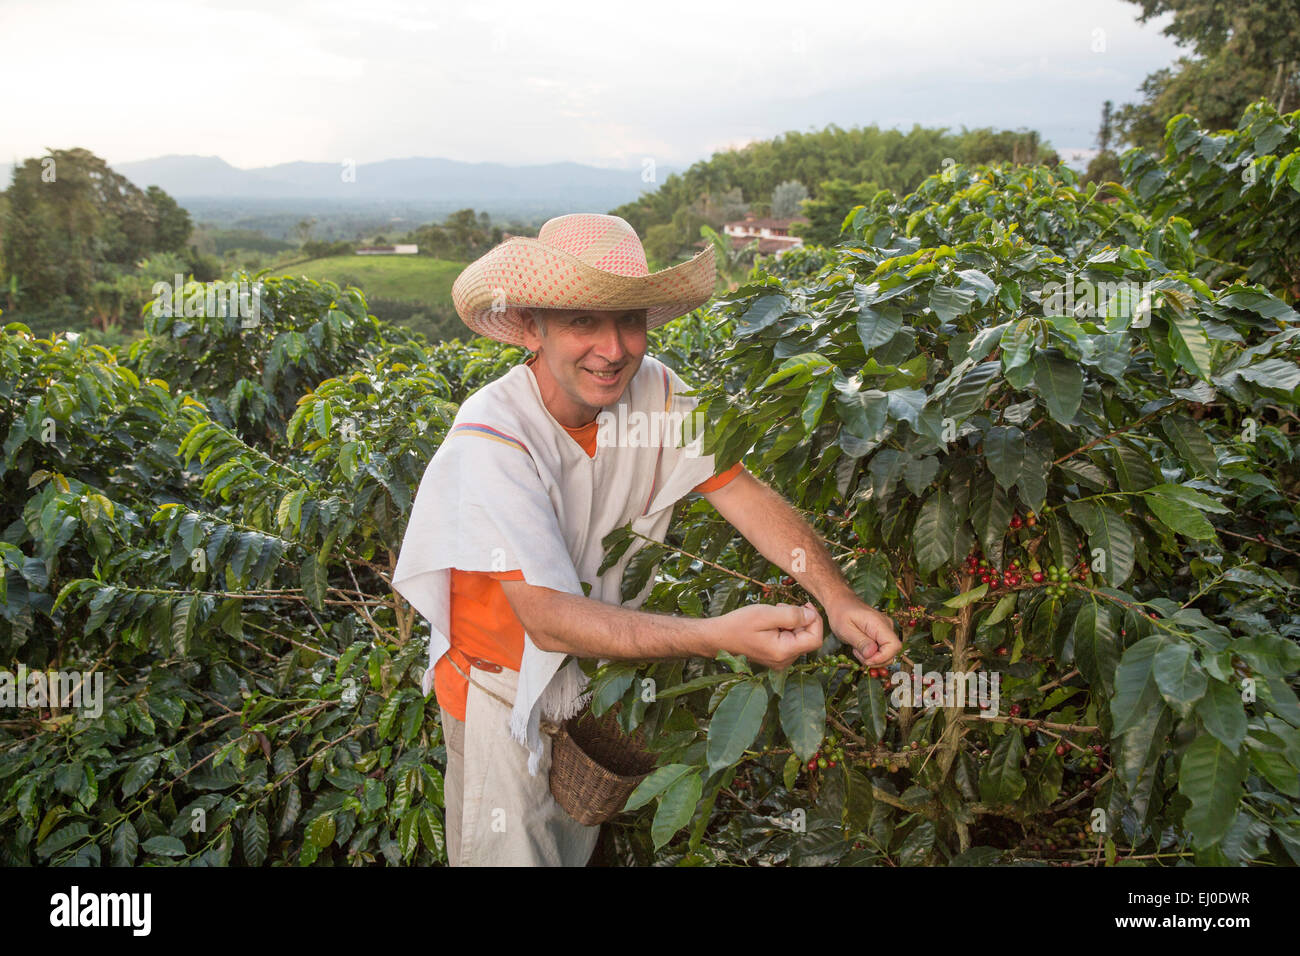 South America, Latin America, Colombia, coffee production, coffee, agriculture, Colombia, work, job, Pereira, picker, Stock Photo